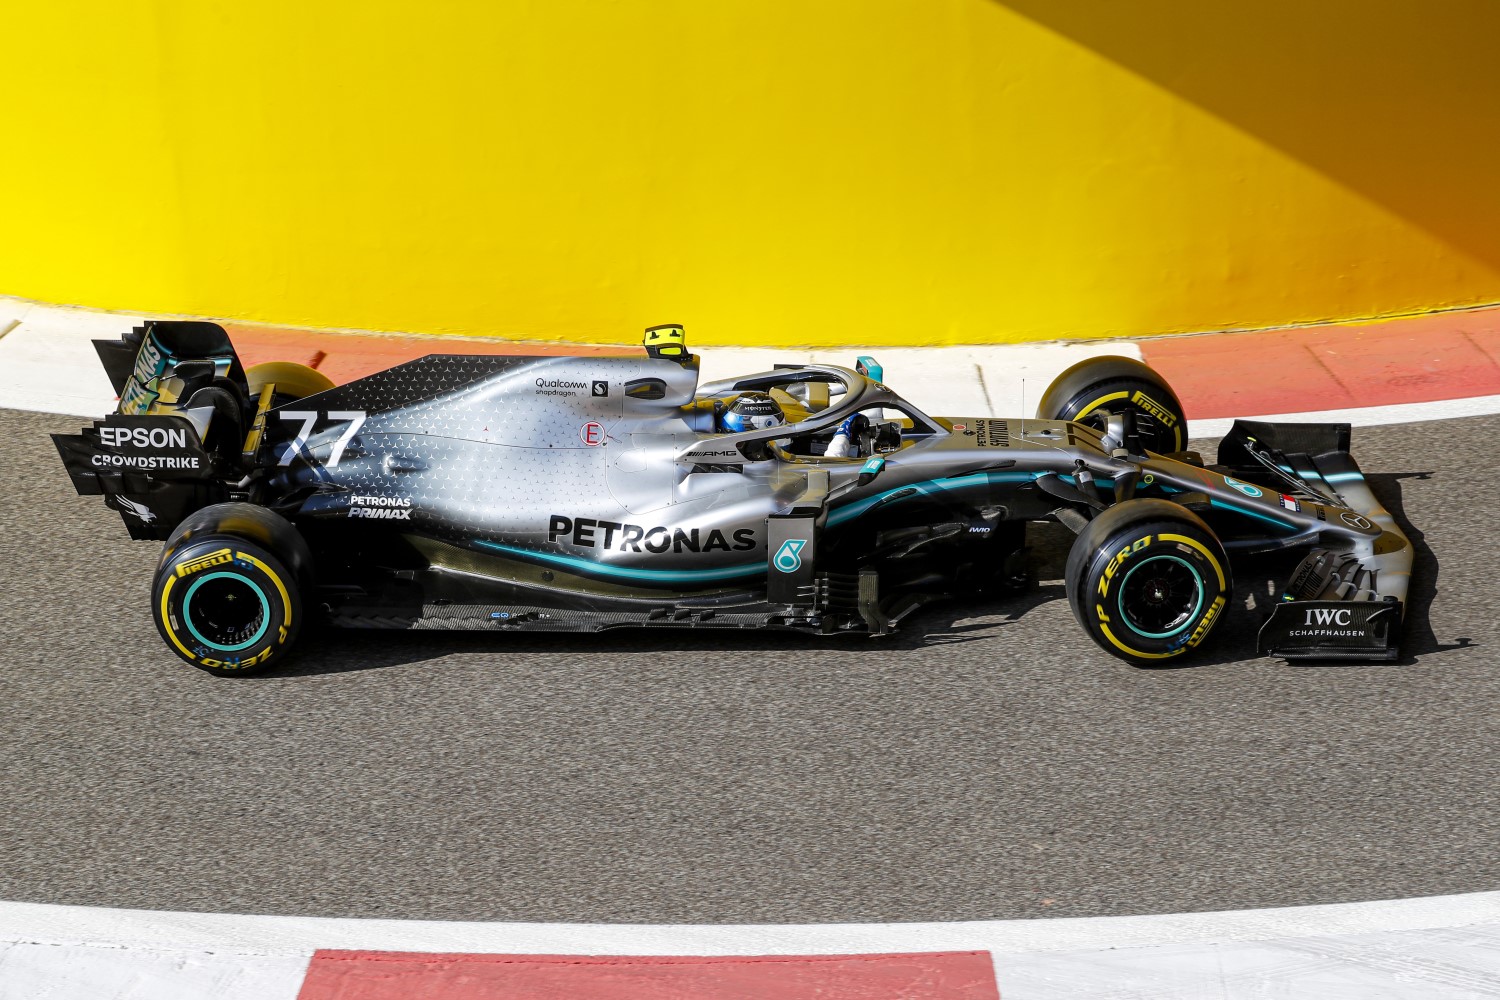 More processing power for Mercedes team